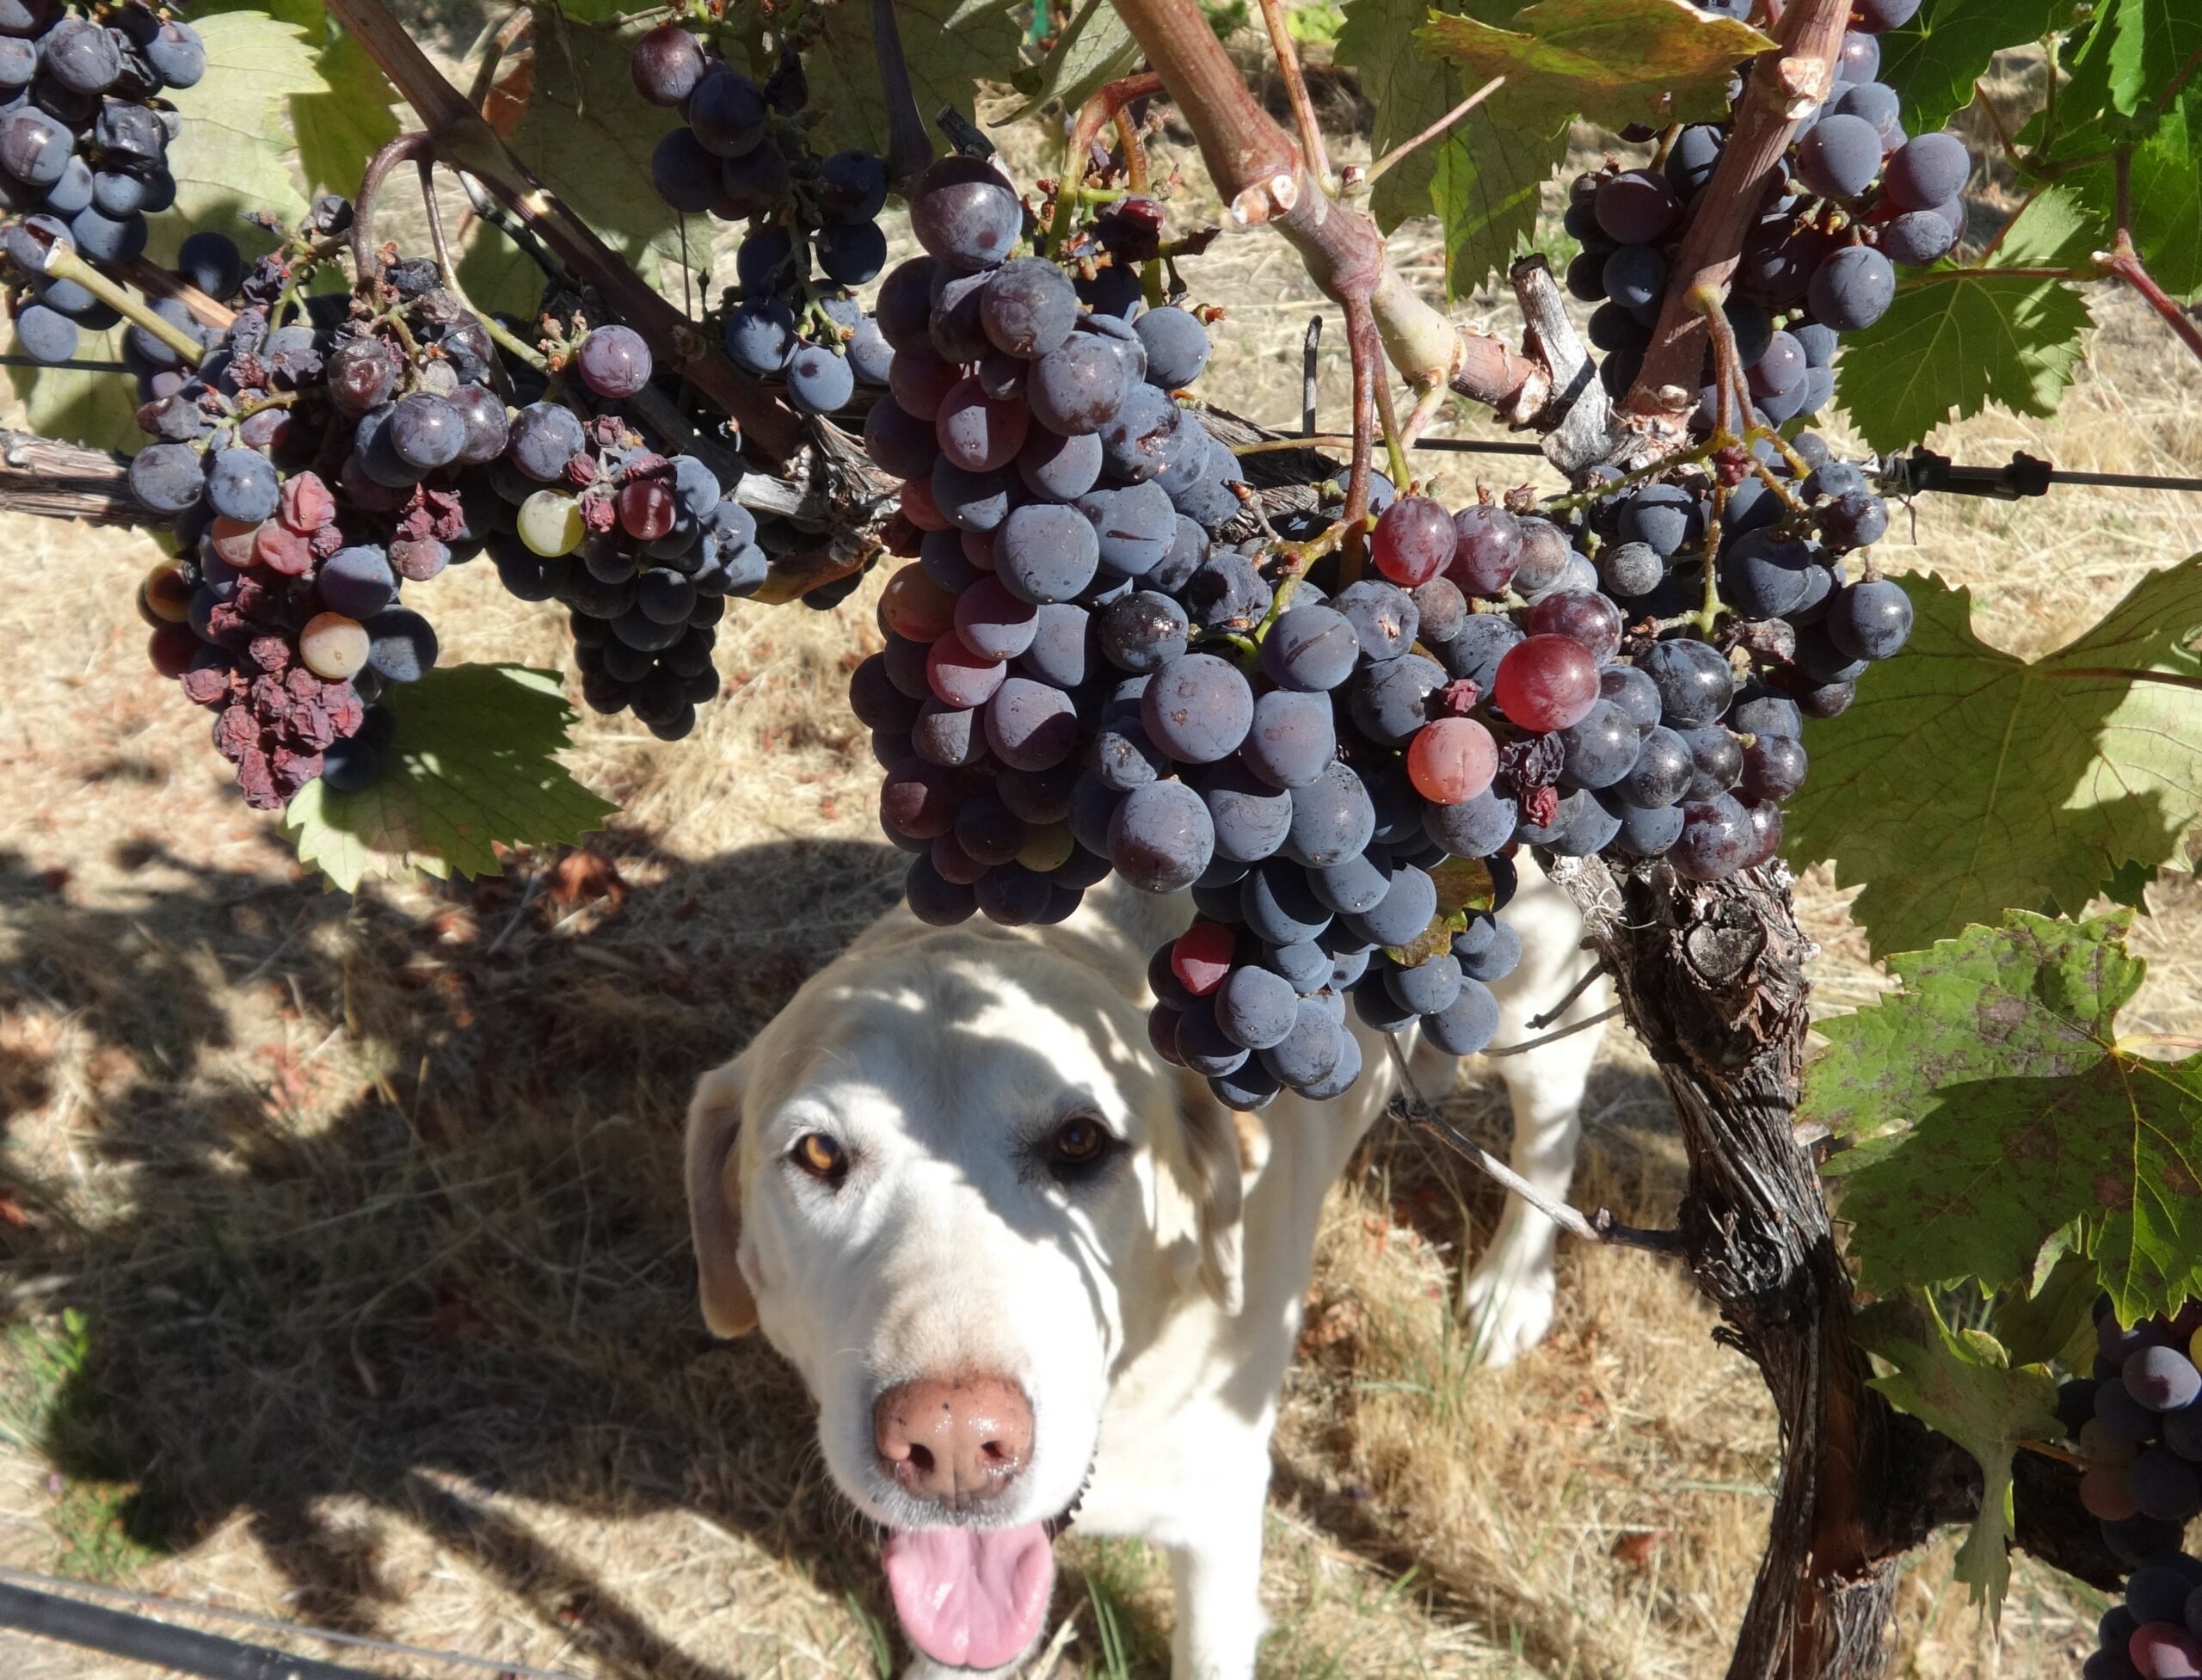 Dog peeking out from behind grapes in lush vineyard